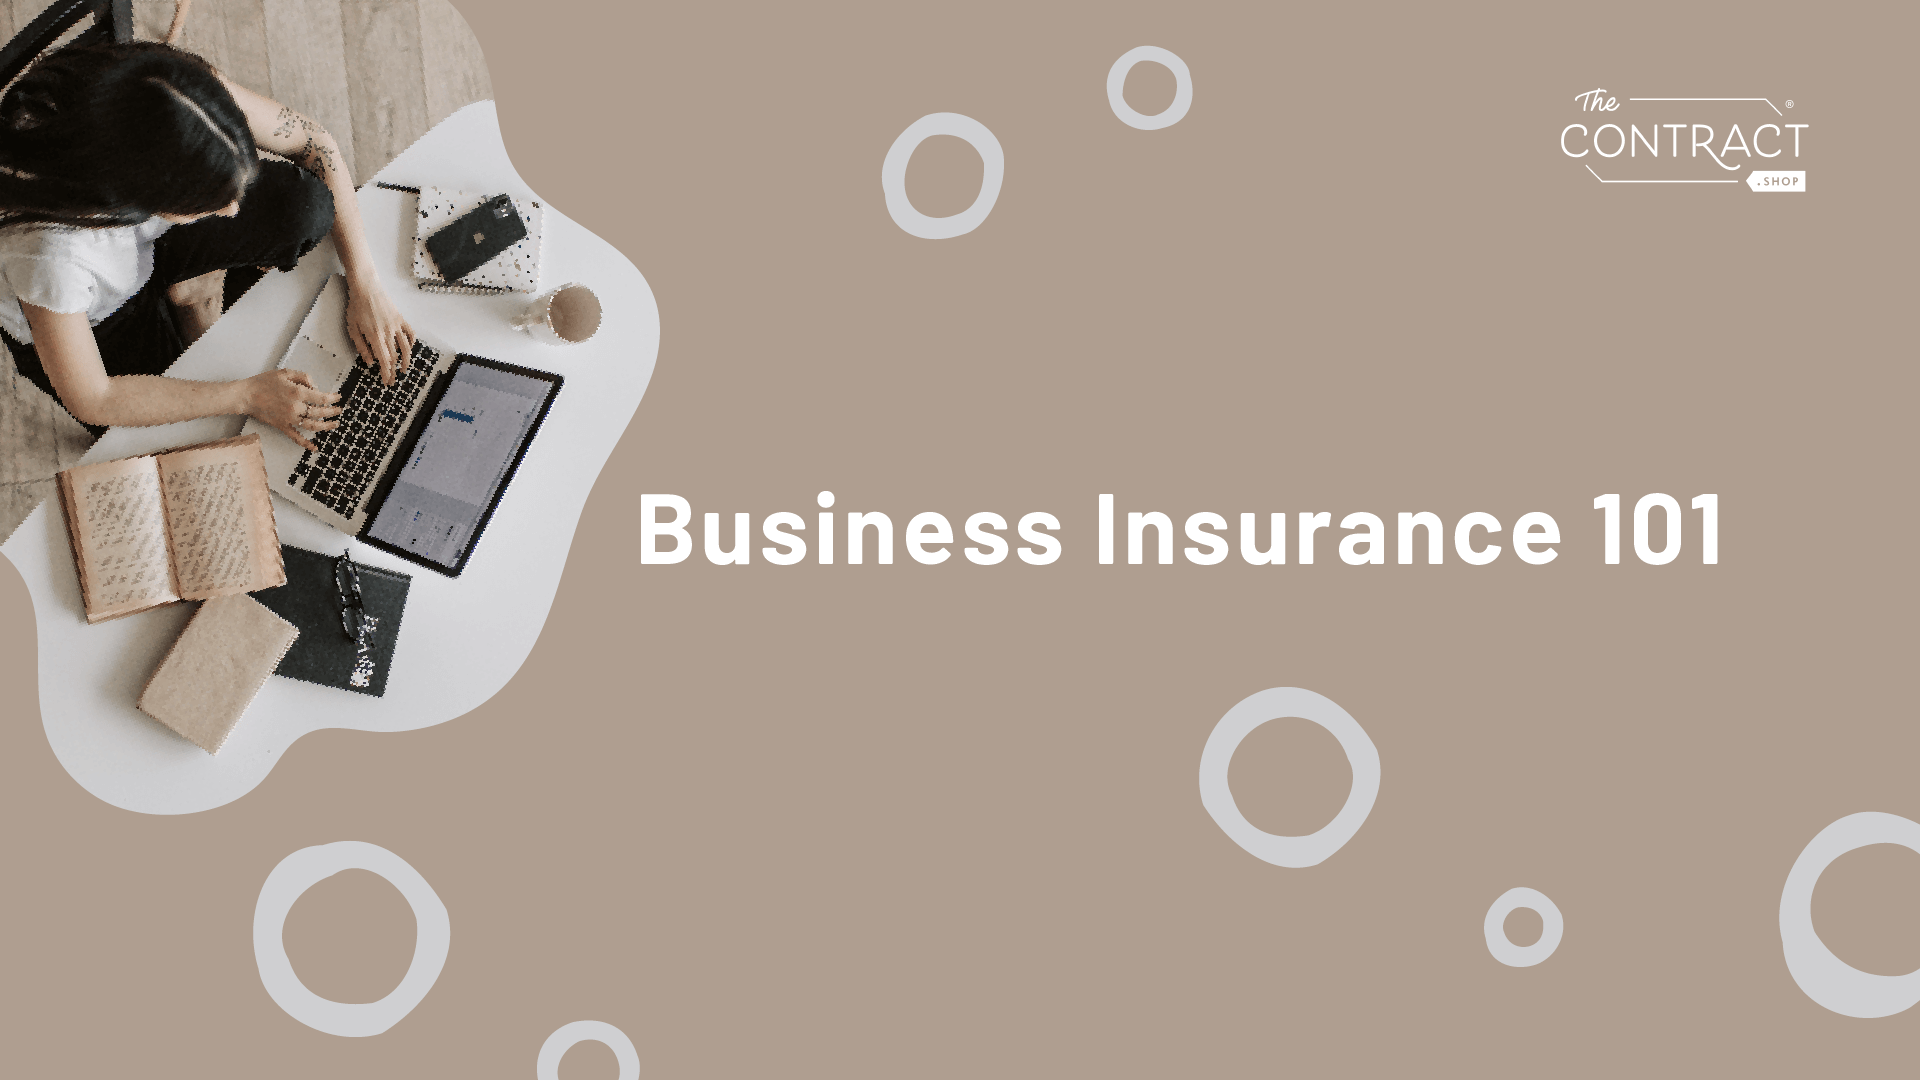 Business Insurance 101: Insurance Your Business May Need